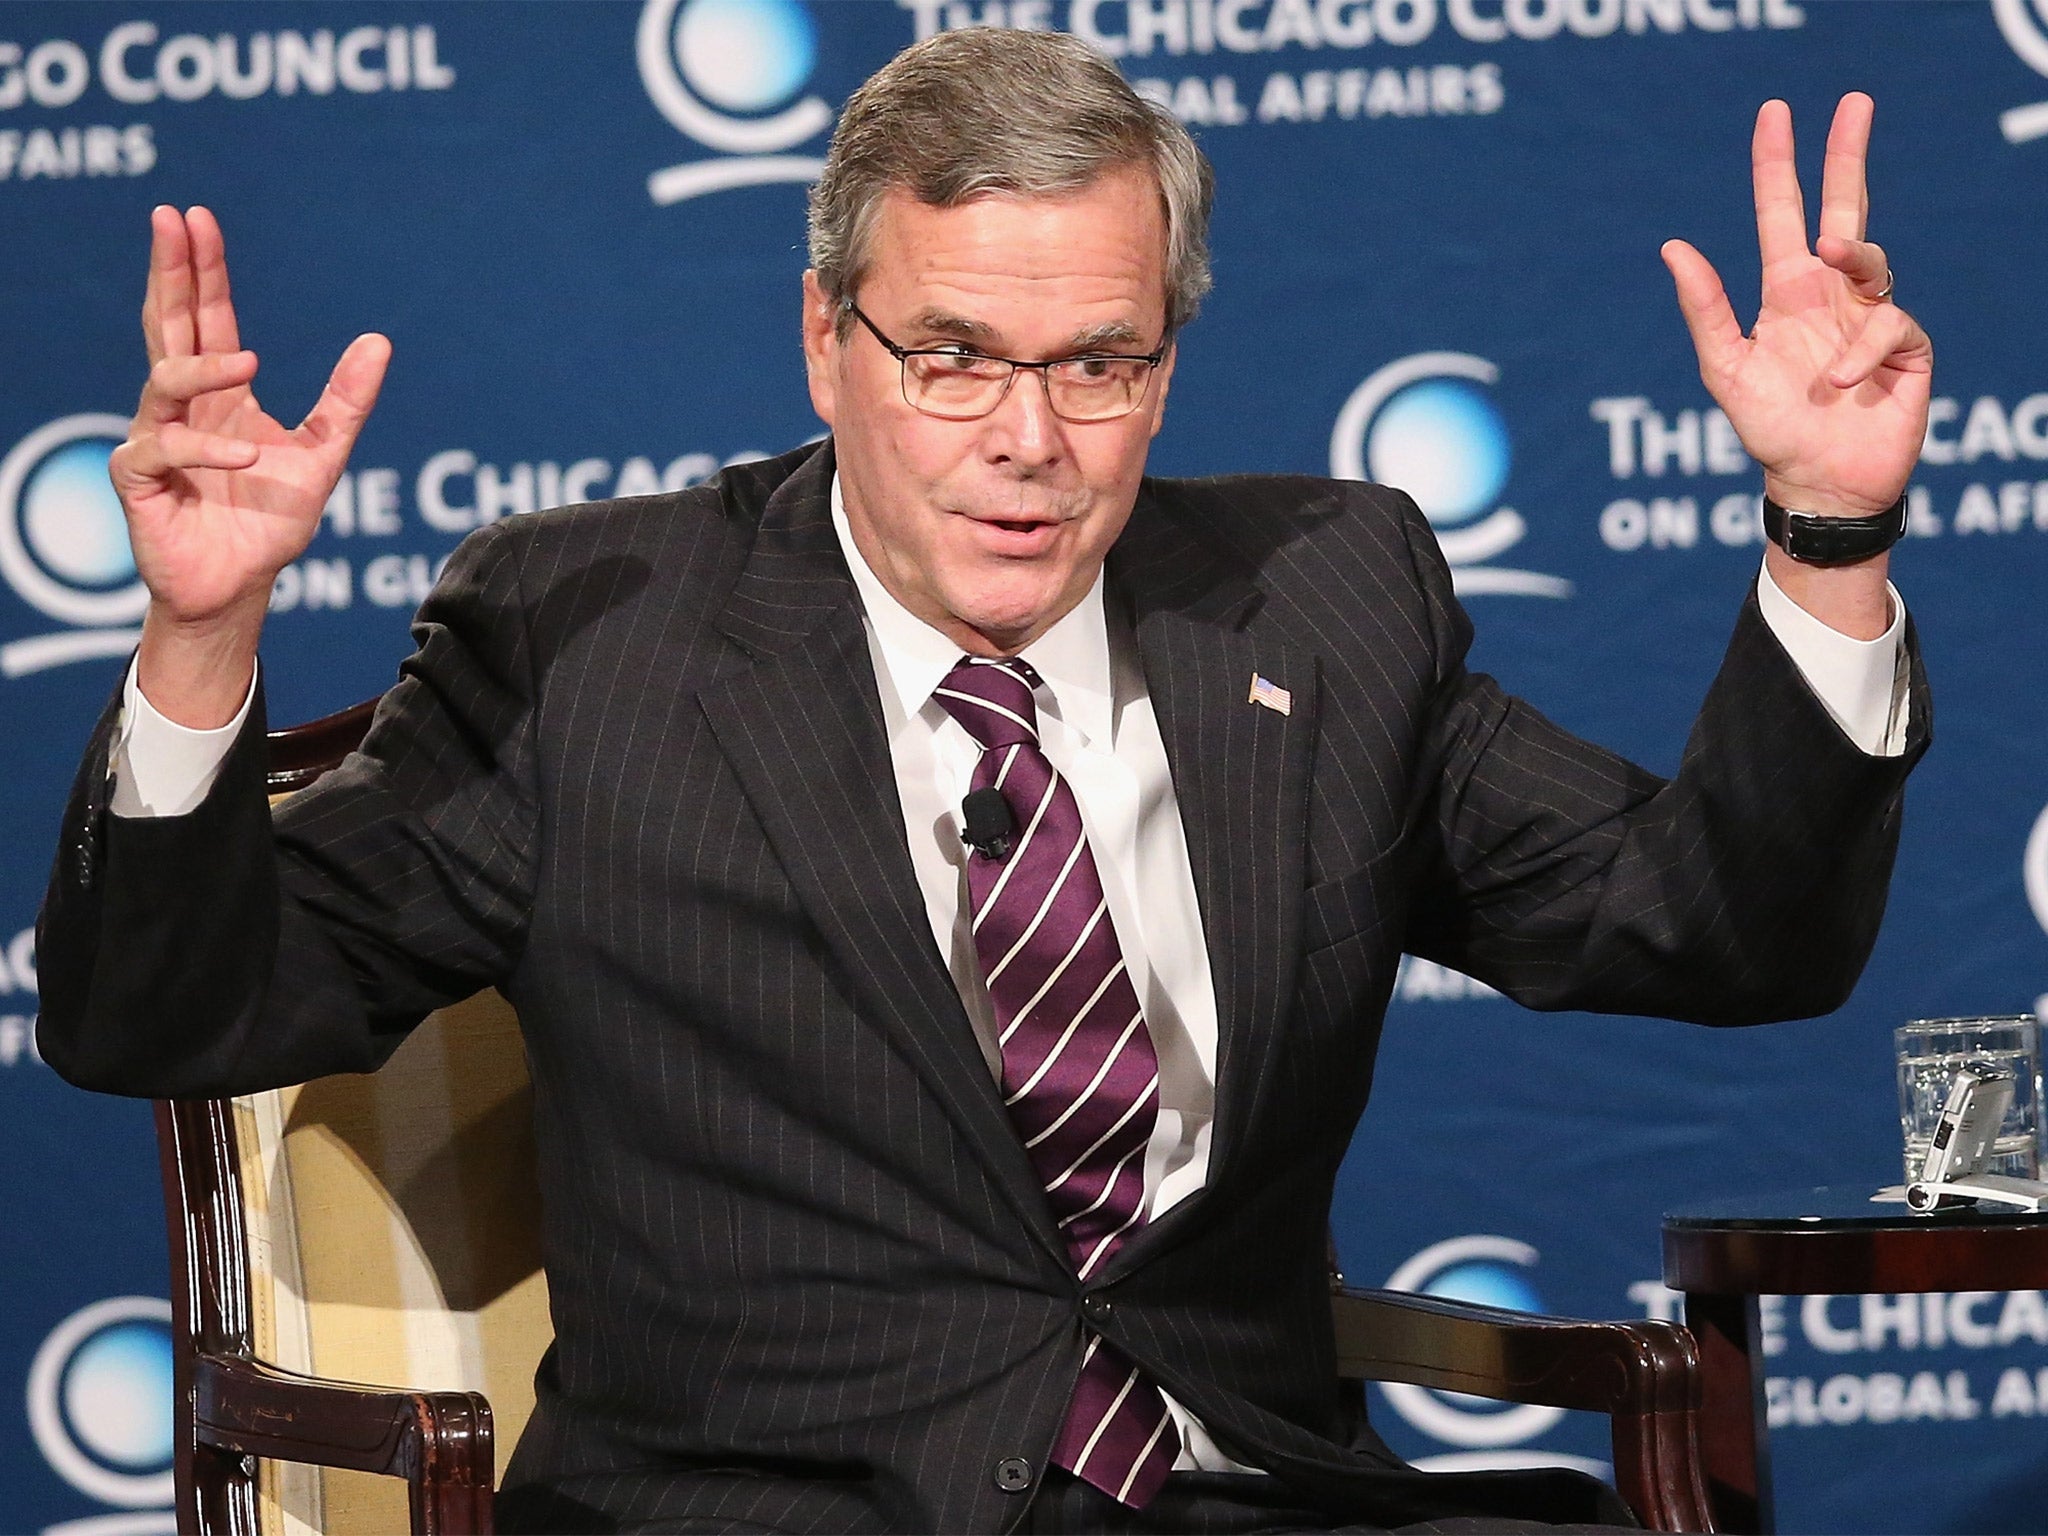 Jeb Bush has attacked the Obama administration for losing influence in world affairs